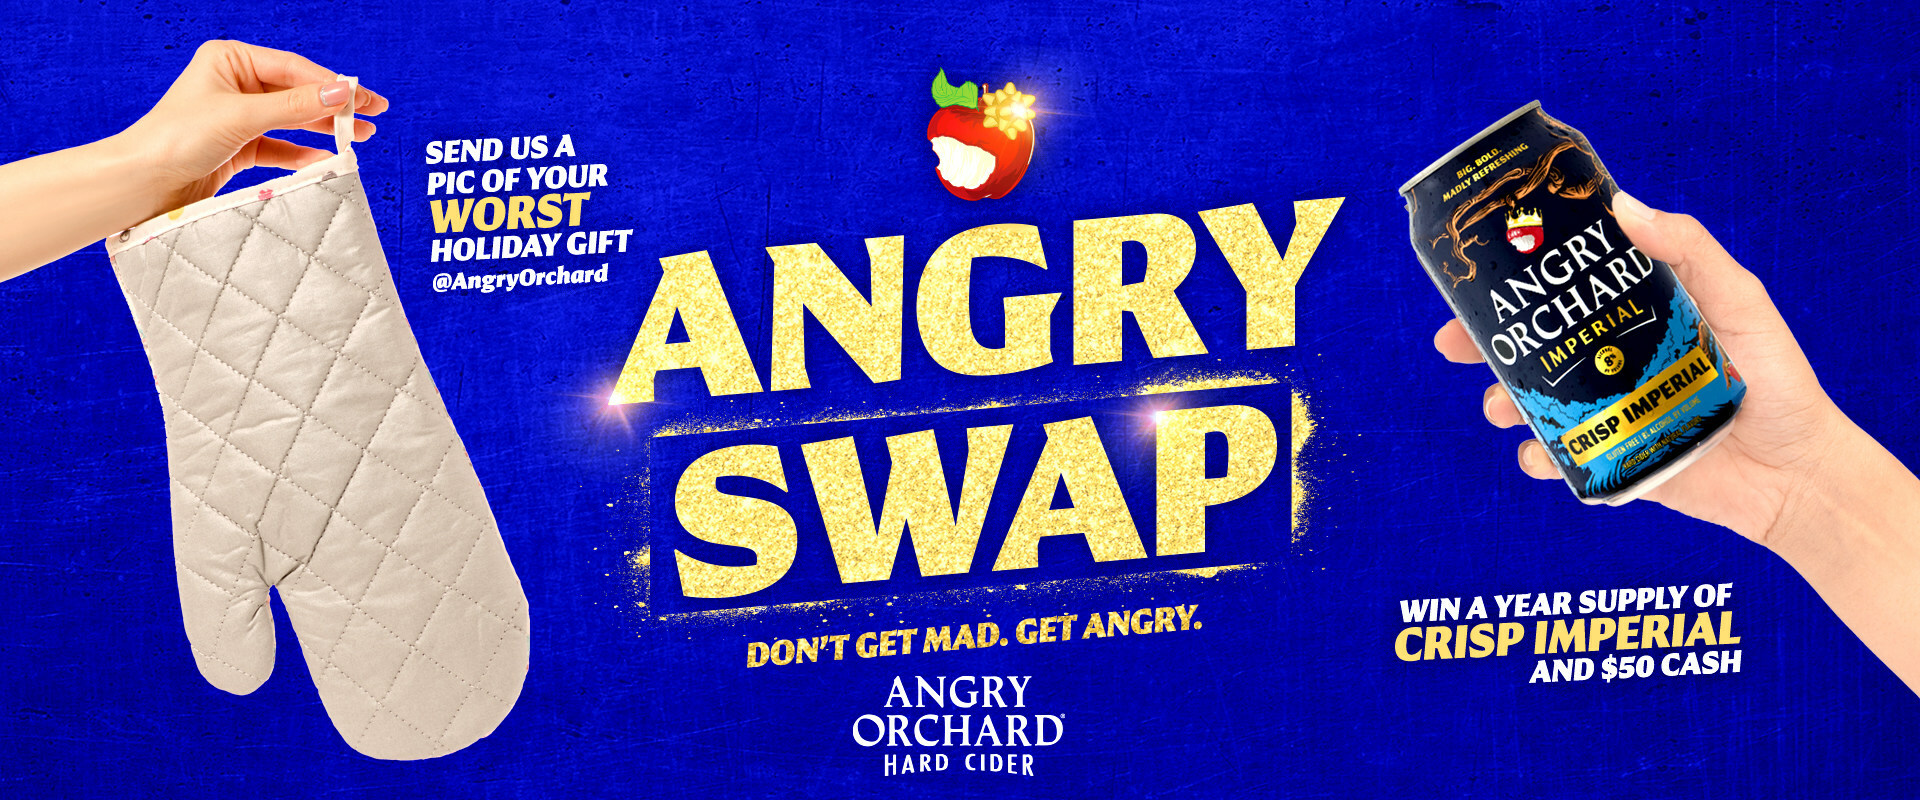 Angry Orchard is making sure drinkers get the gift and taste they deserve this holiday season by creating the first-ever Angry Swap.